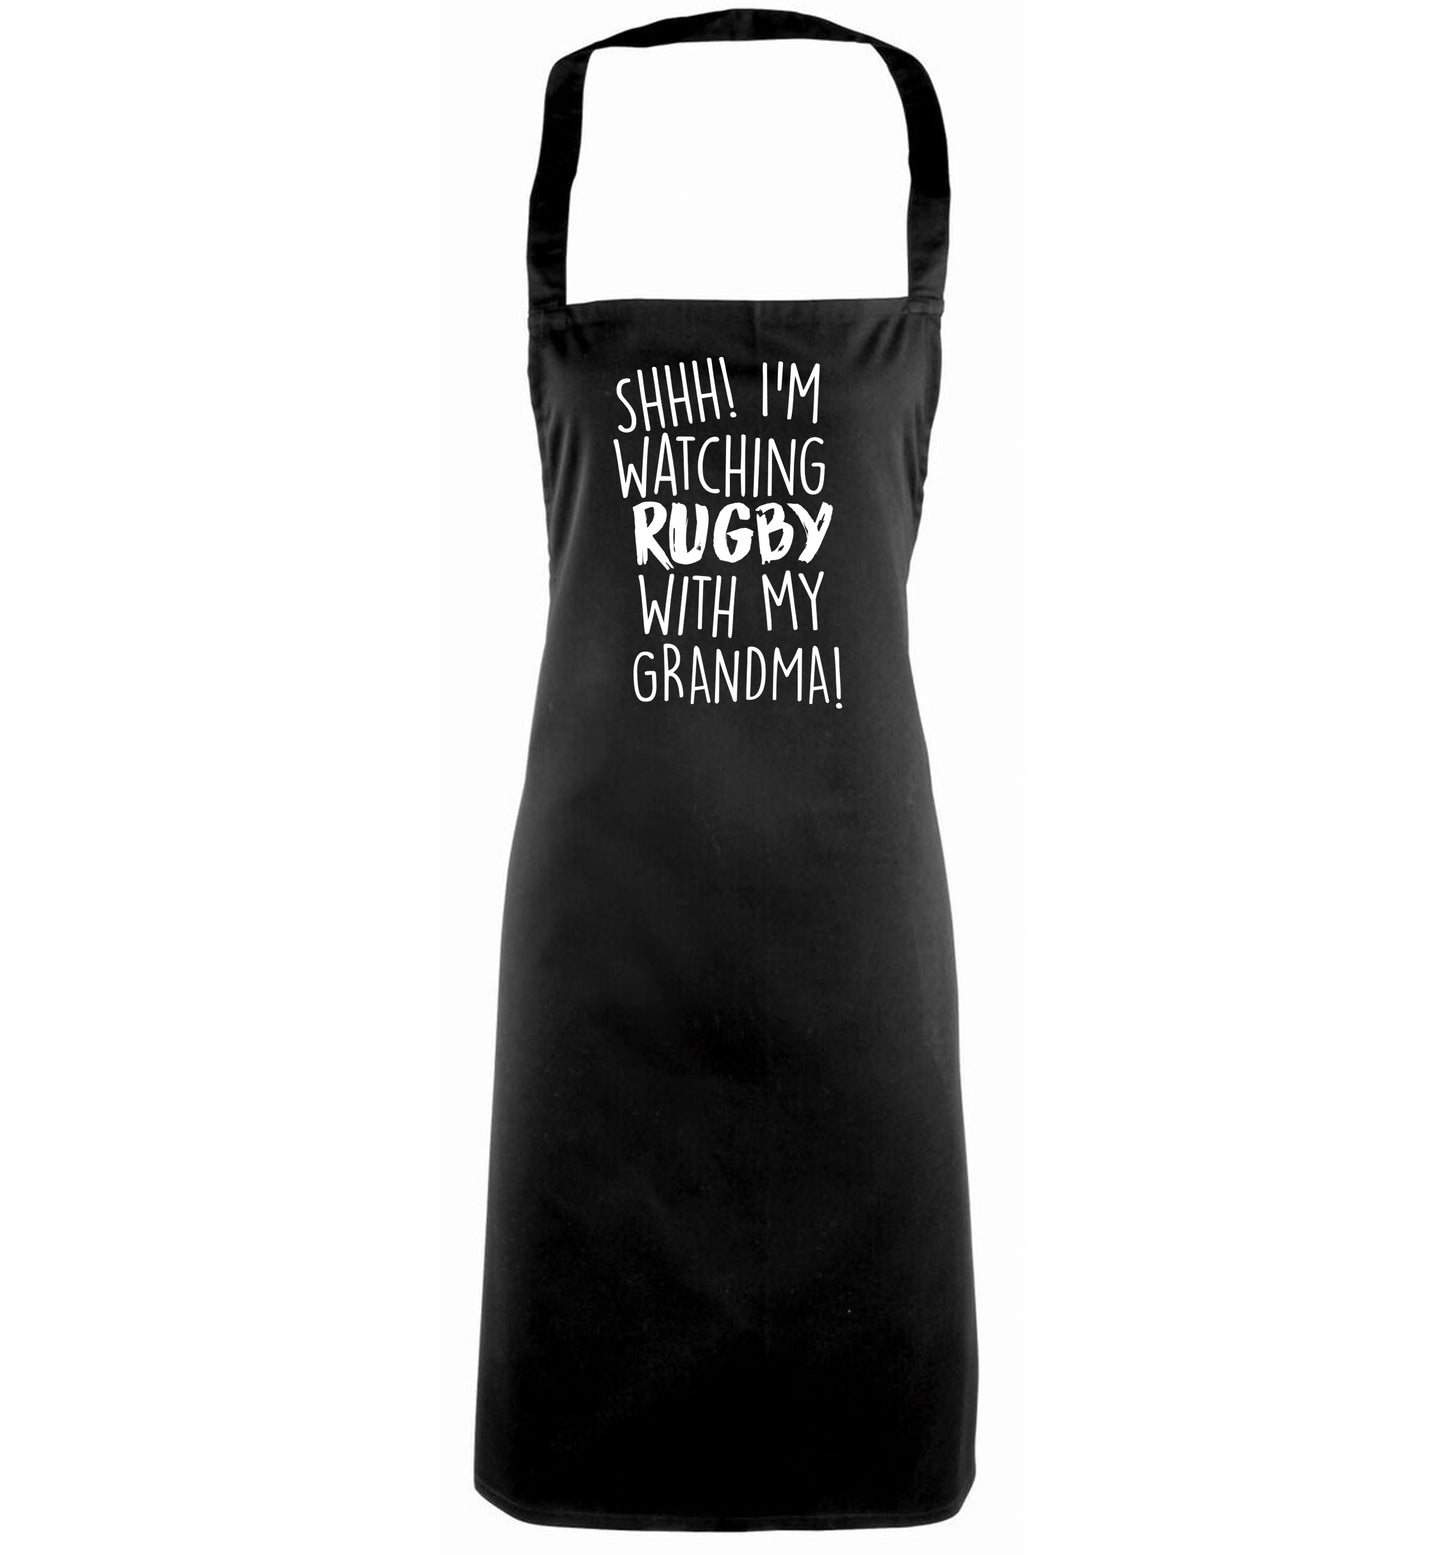 Shh I'm watching rugby with my grandma black apron